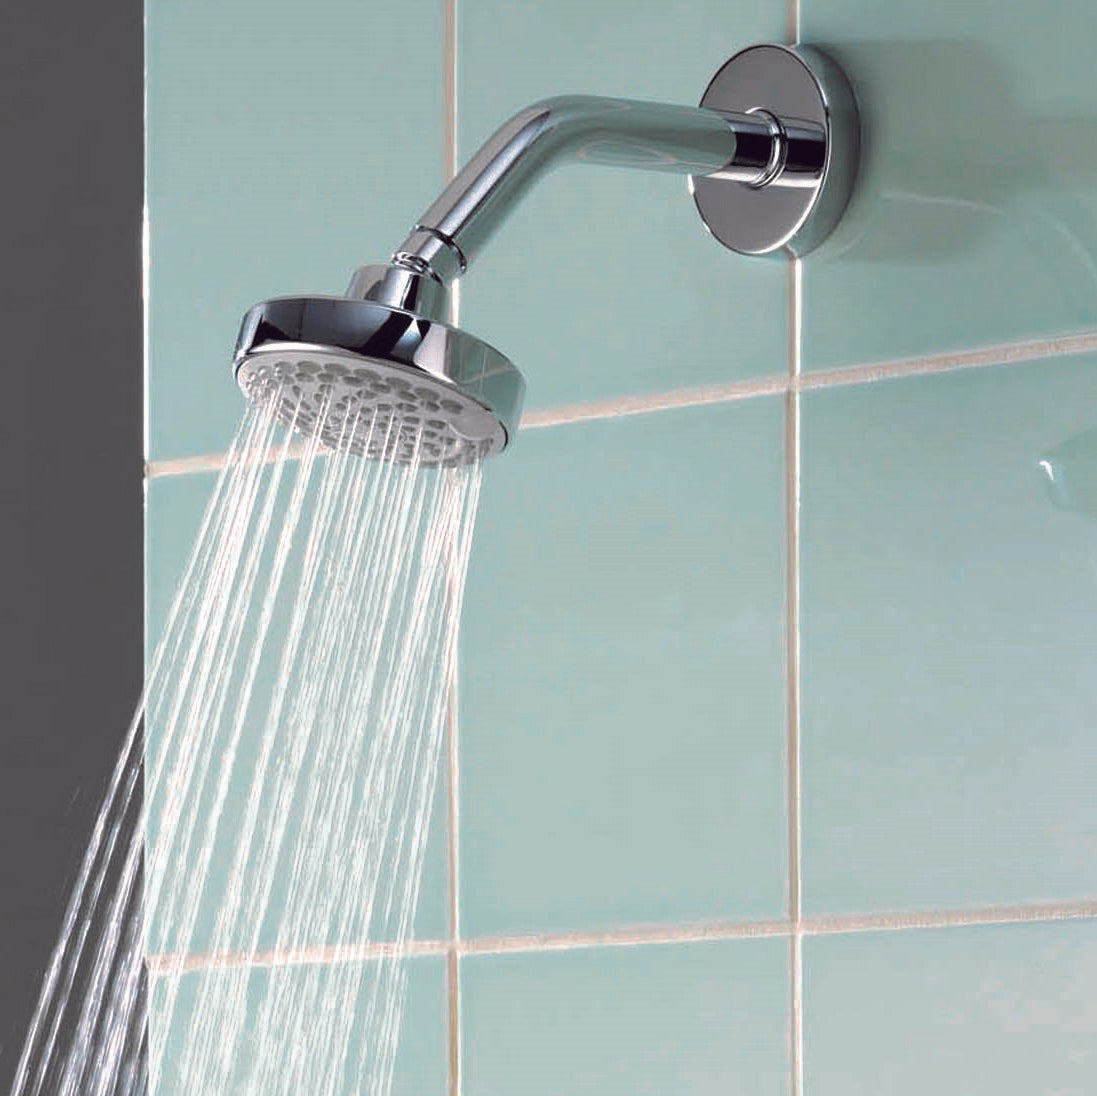 Aqualisa Aspire Mixer Shower with green wall tiles with water flowing ASP001CF